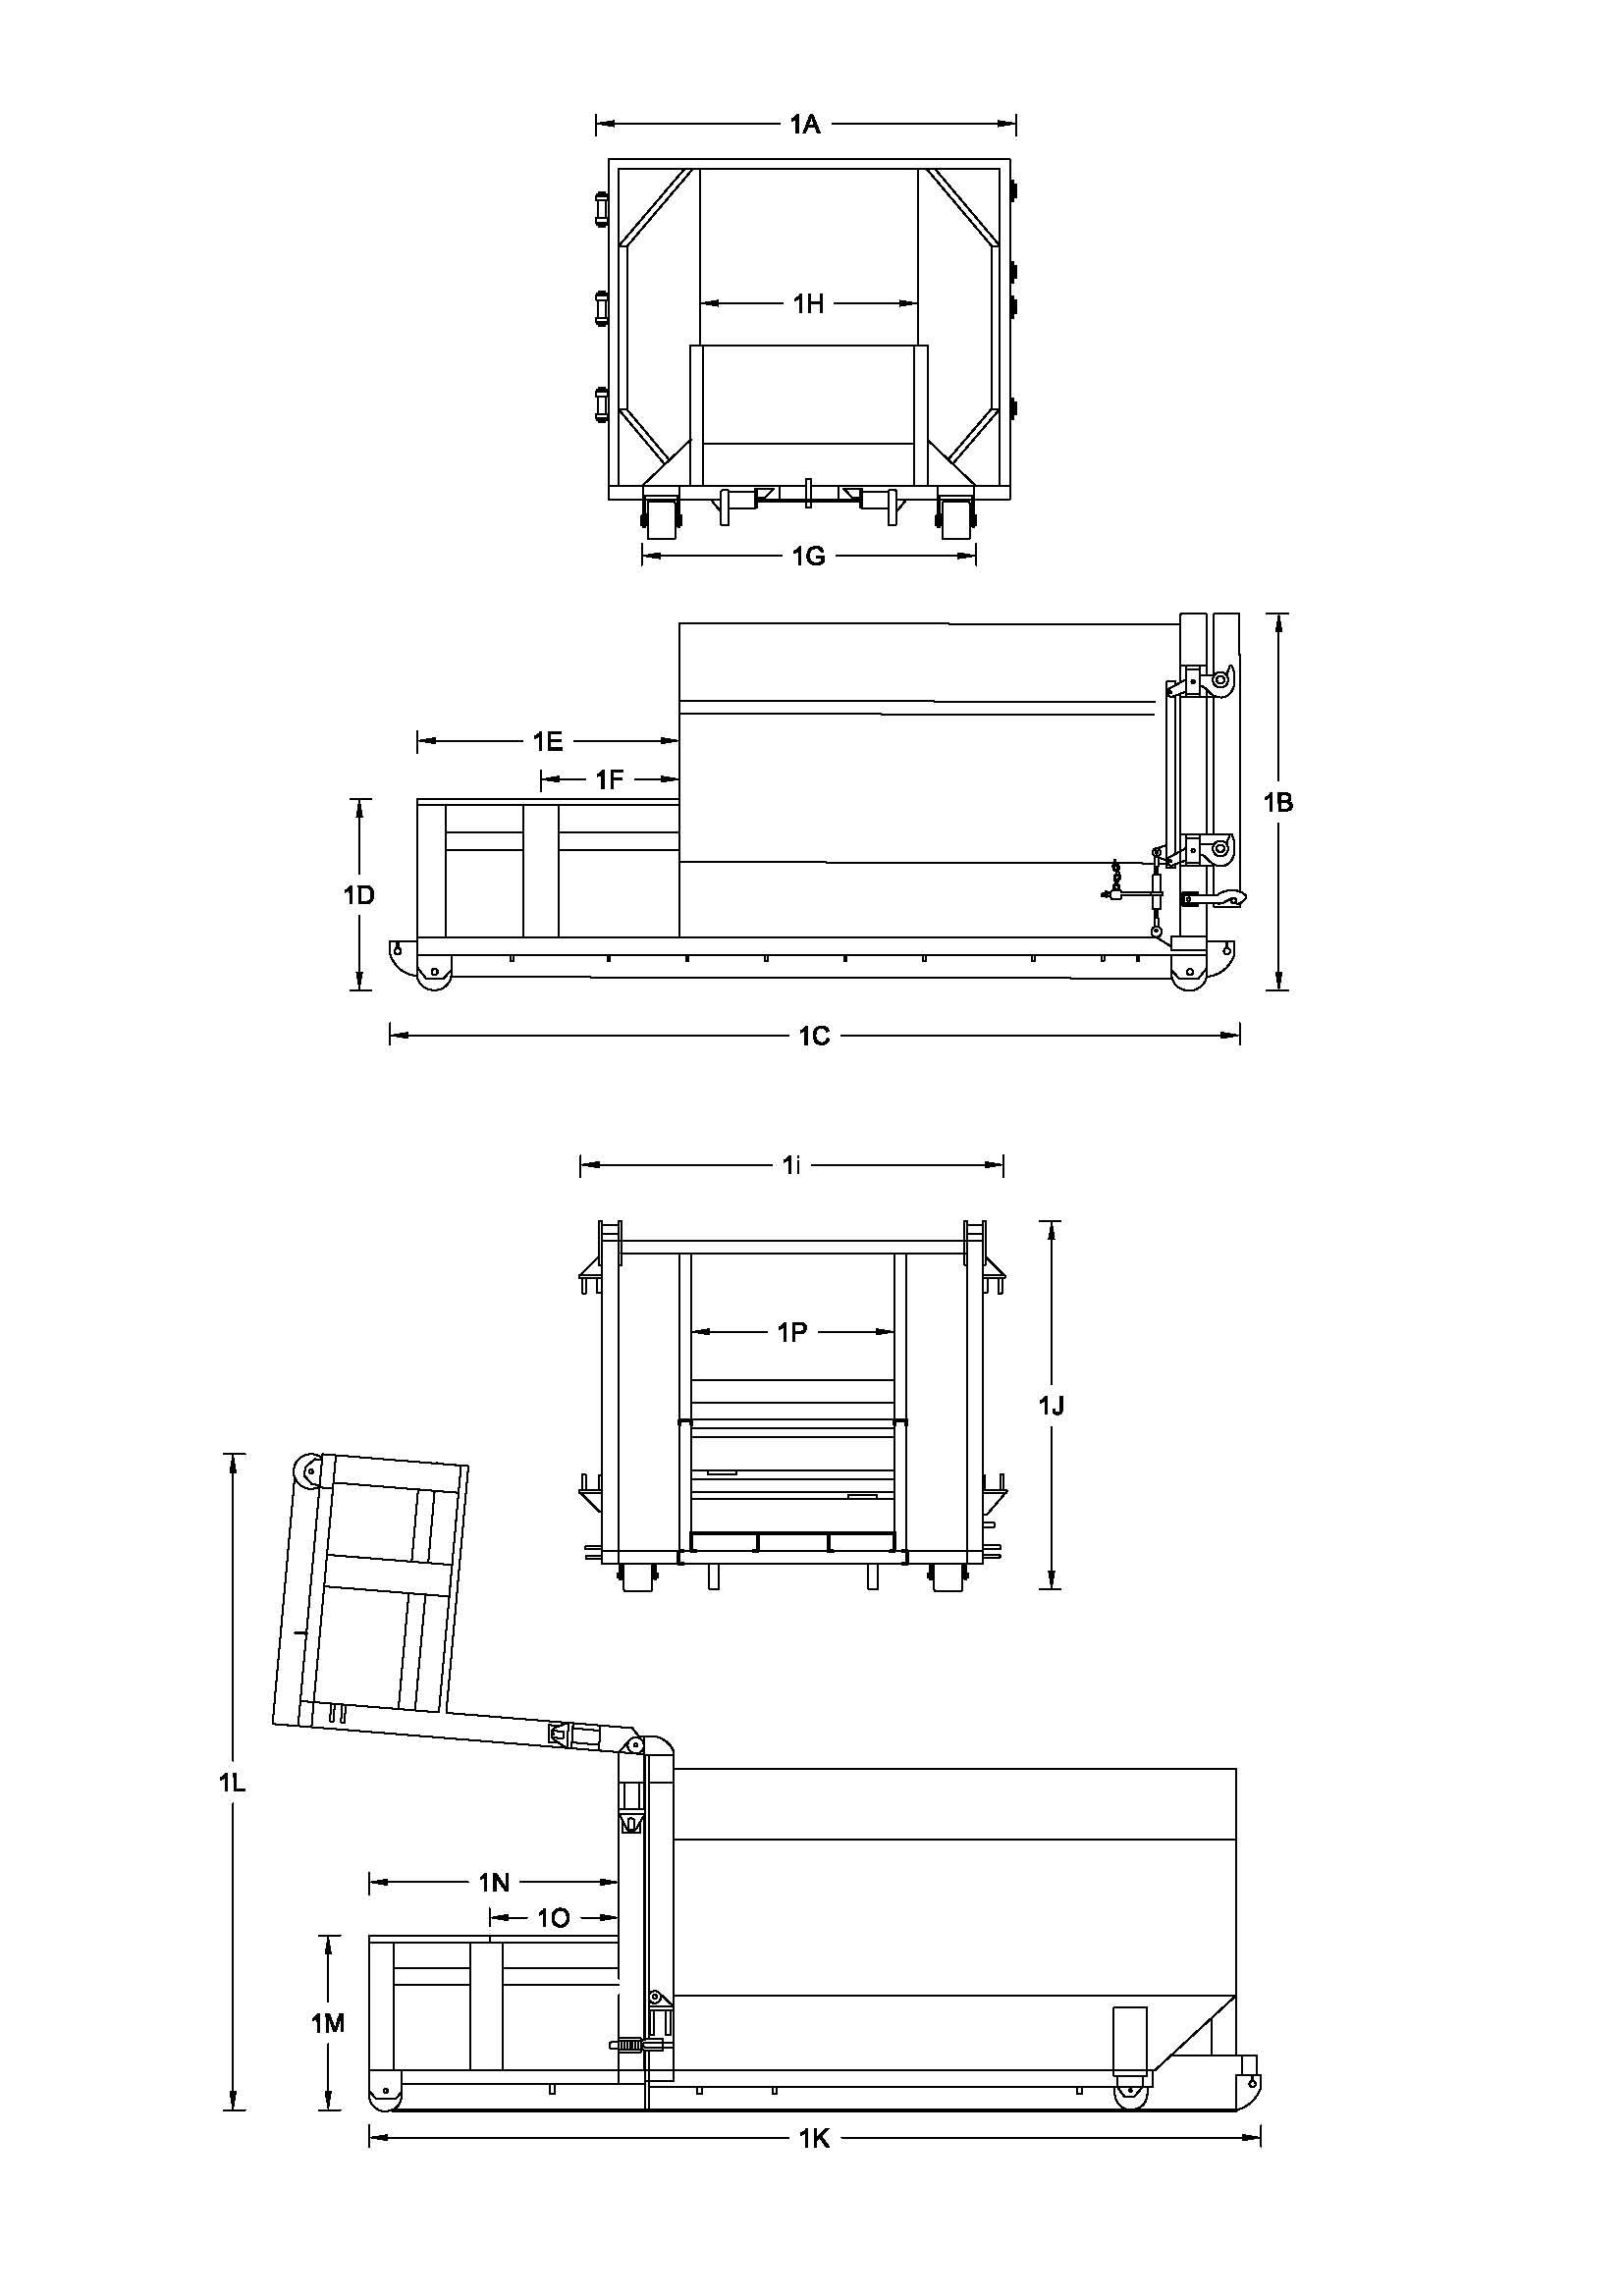 1 Yard Self Contained Compactor Diagram